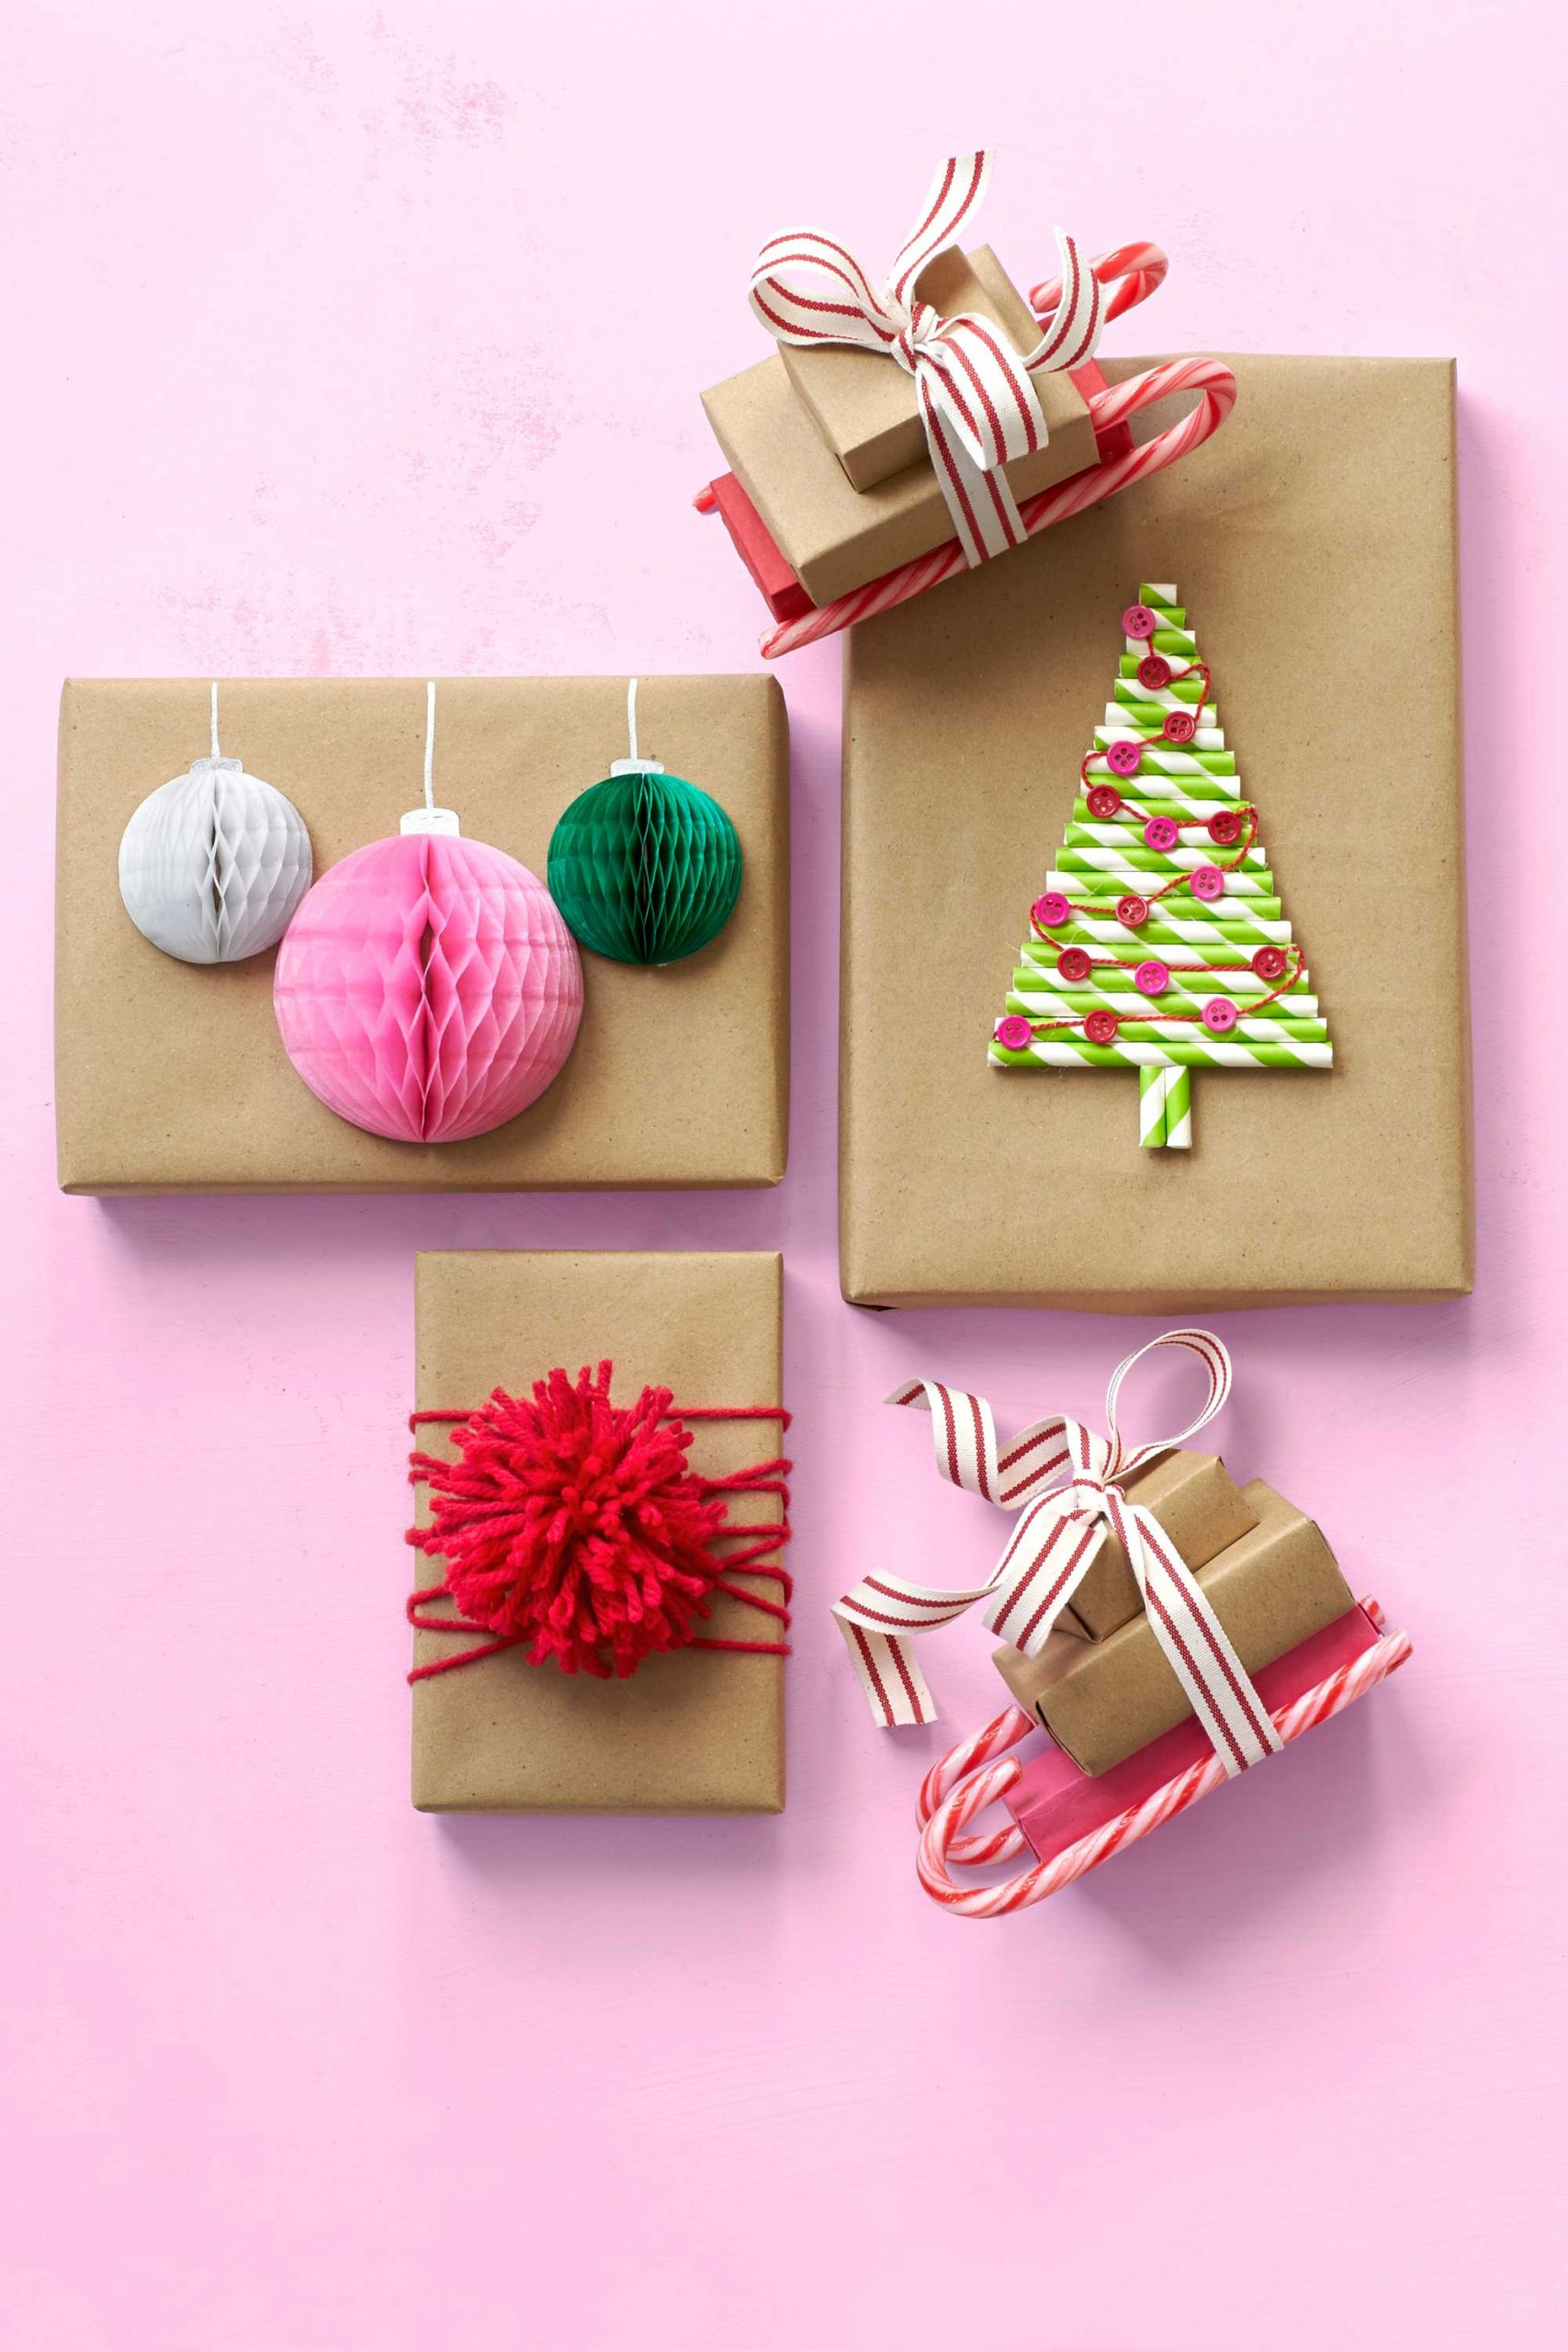 Christmas Gift Wrapping Ideas Pinterest
 30 Unique Gift Wrapping Ideas for Christmas How to Wrap